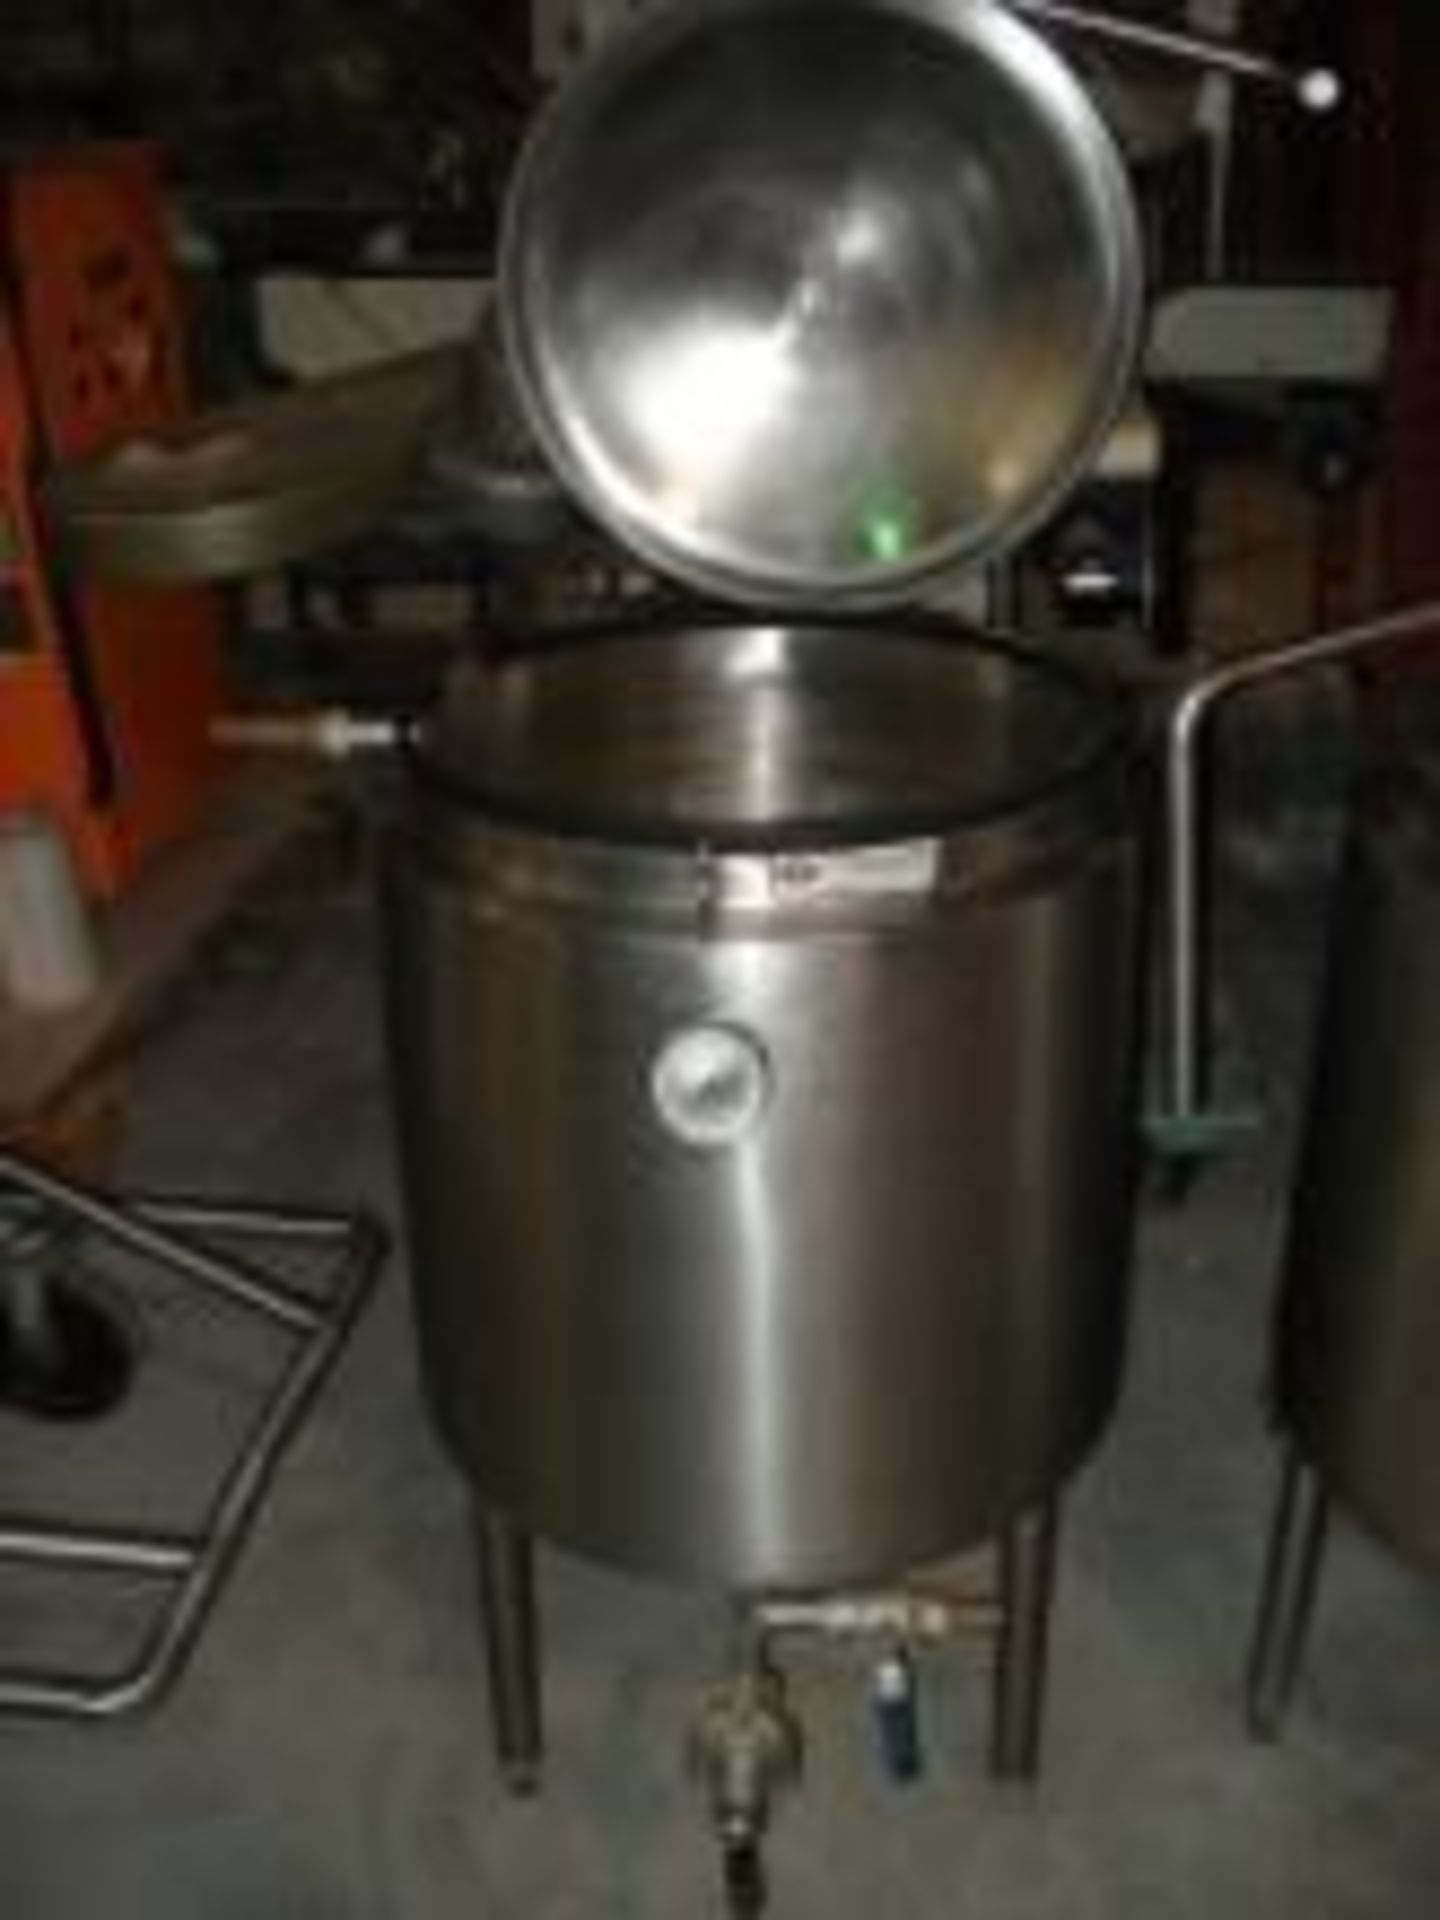 Used Cask Brewing 20 Imperial Gallon Stainless Steel Kettles. Load Out Fee:50